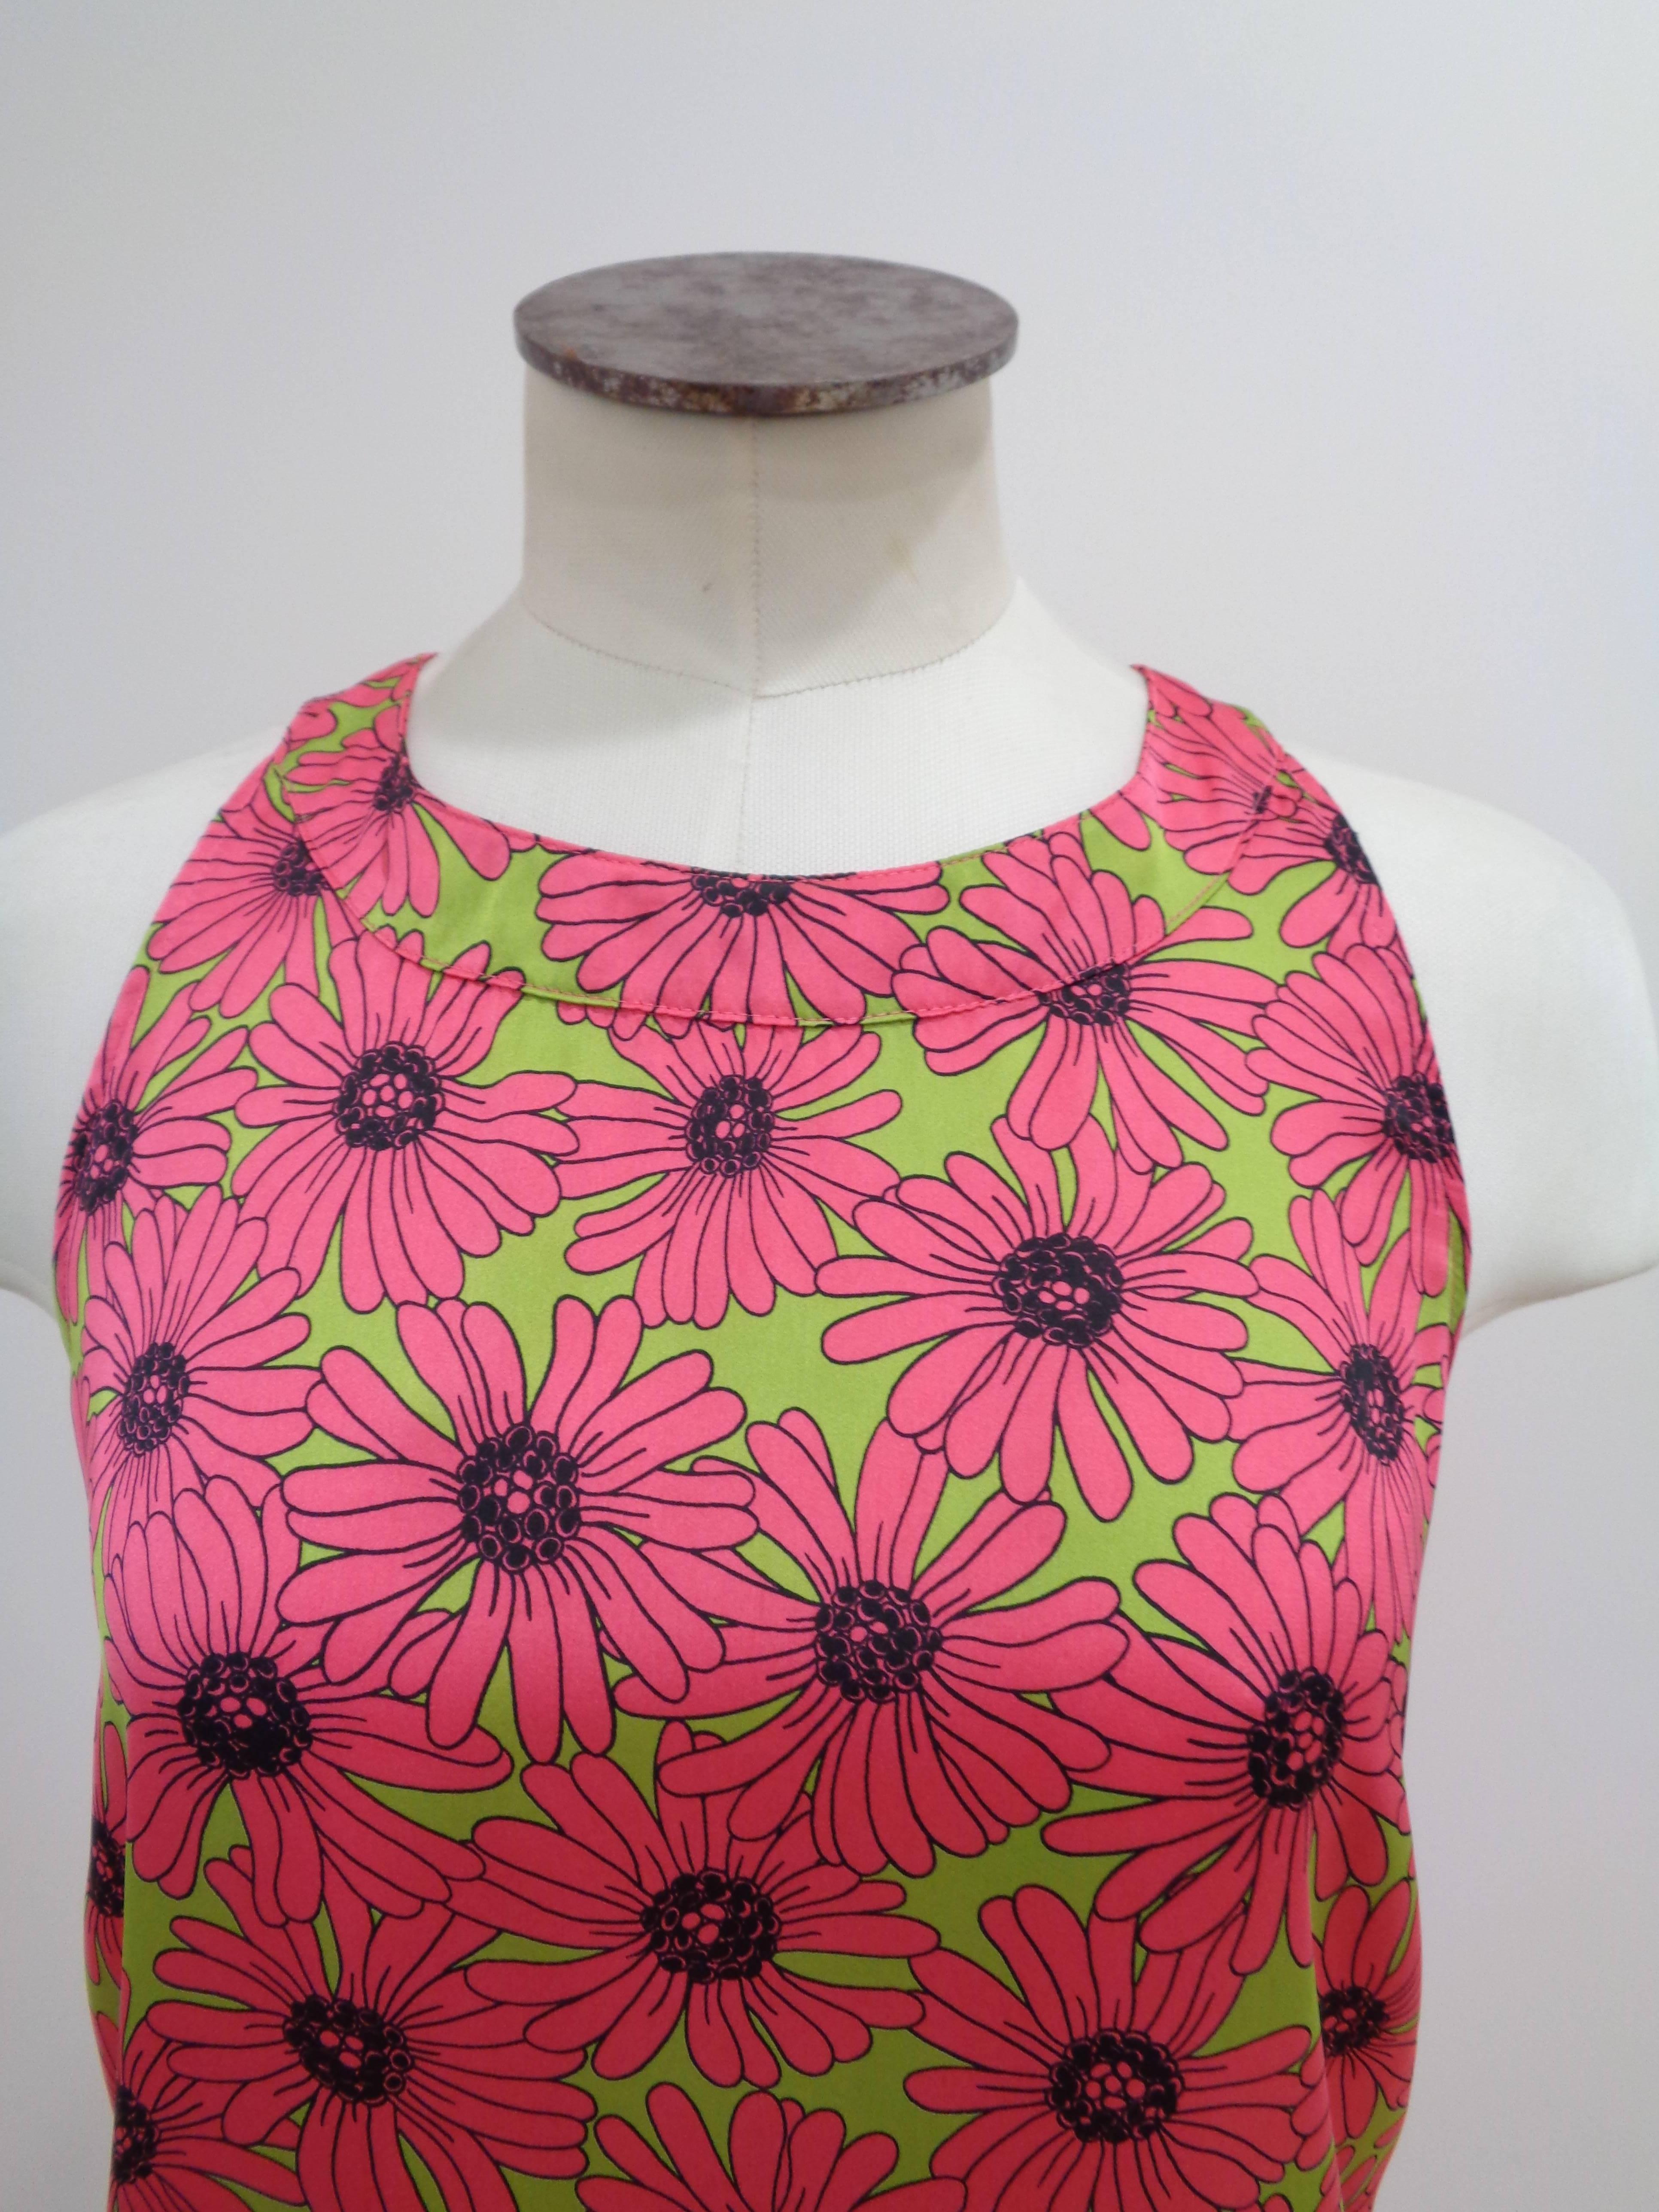 Love Moschino Pink flower Dress

Totally made in italy in italian size range 48